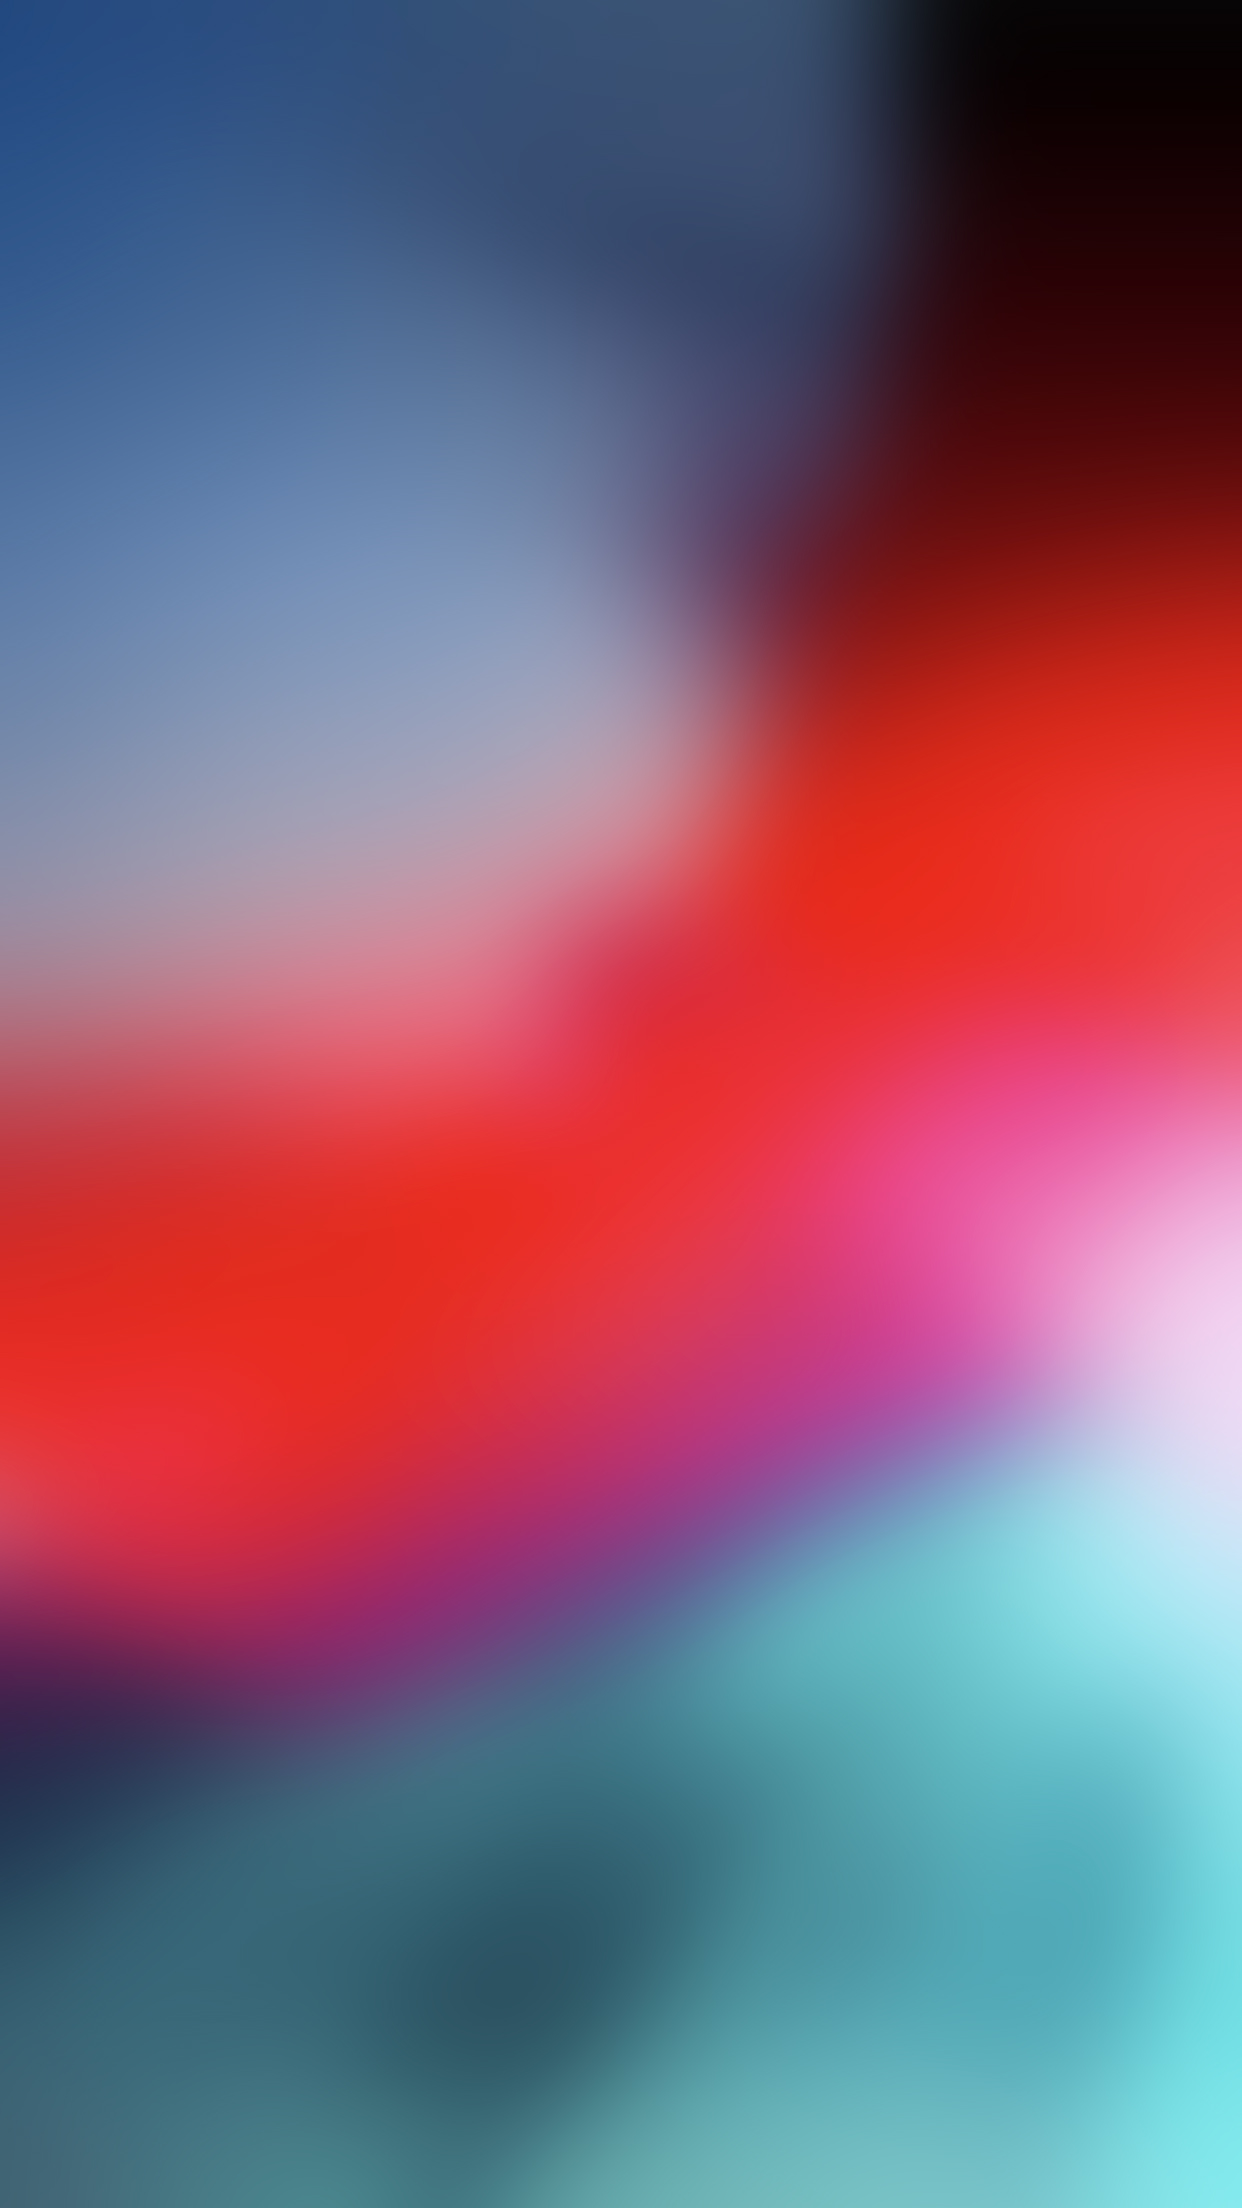 Blurred iOS 12 Stock Wallpaper - Wallpapers Central